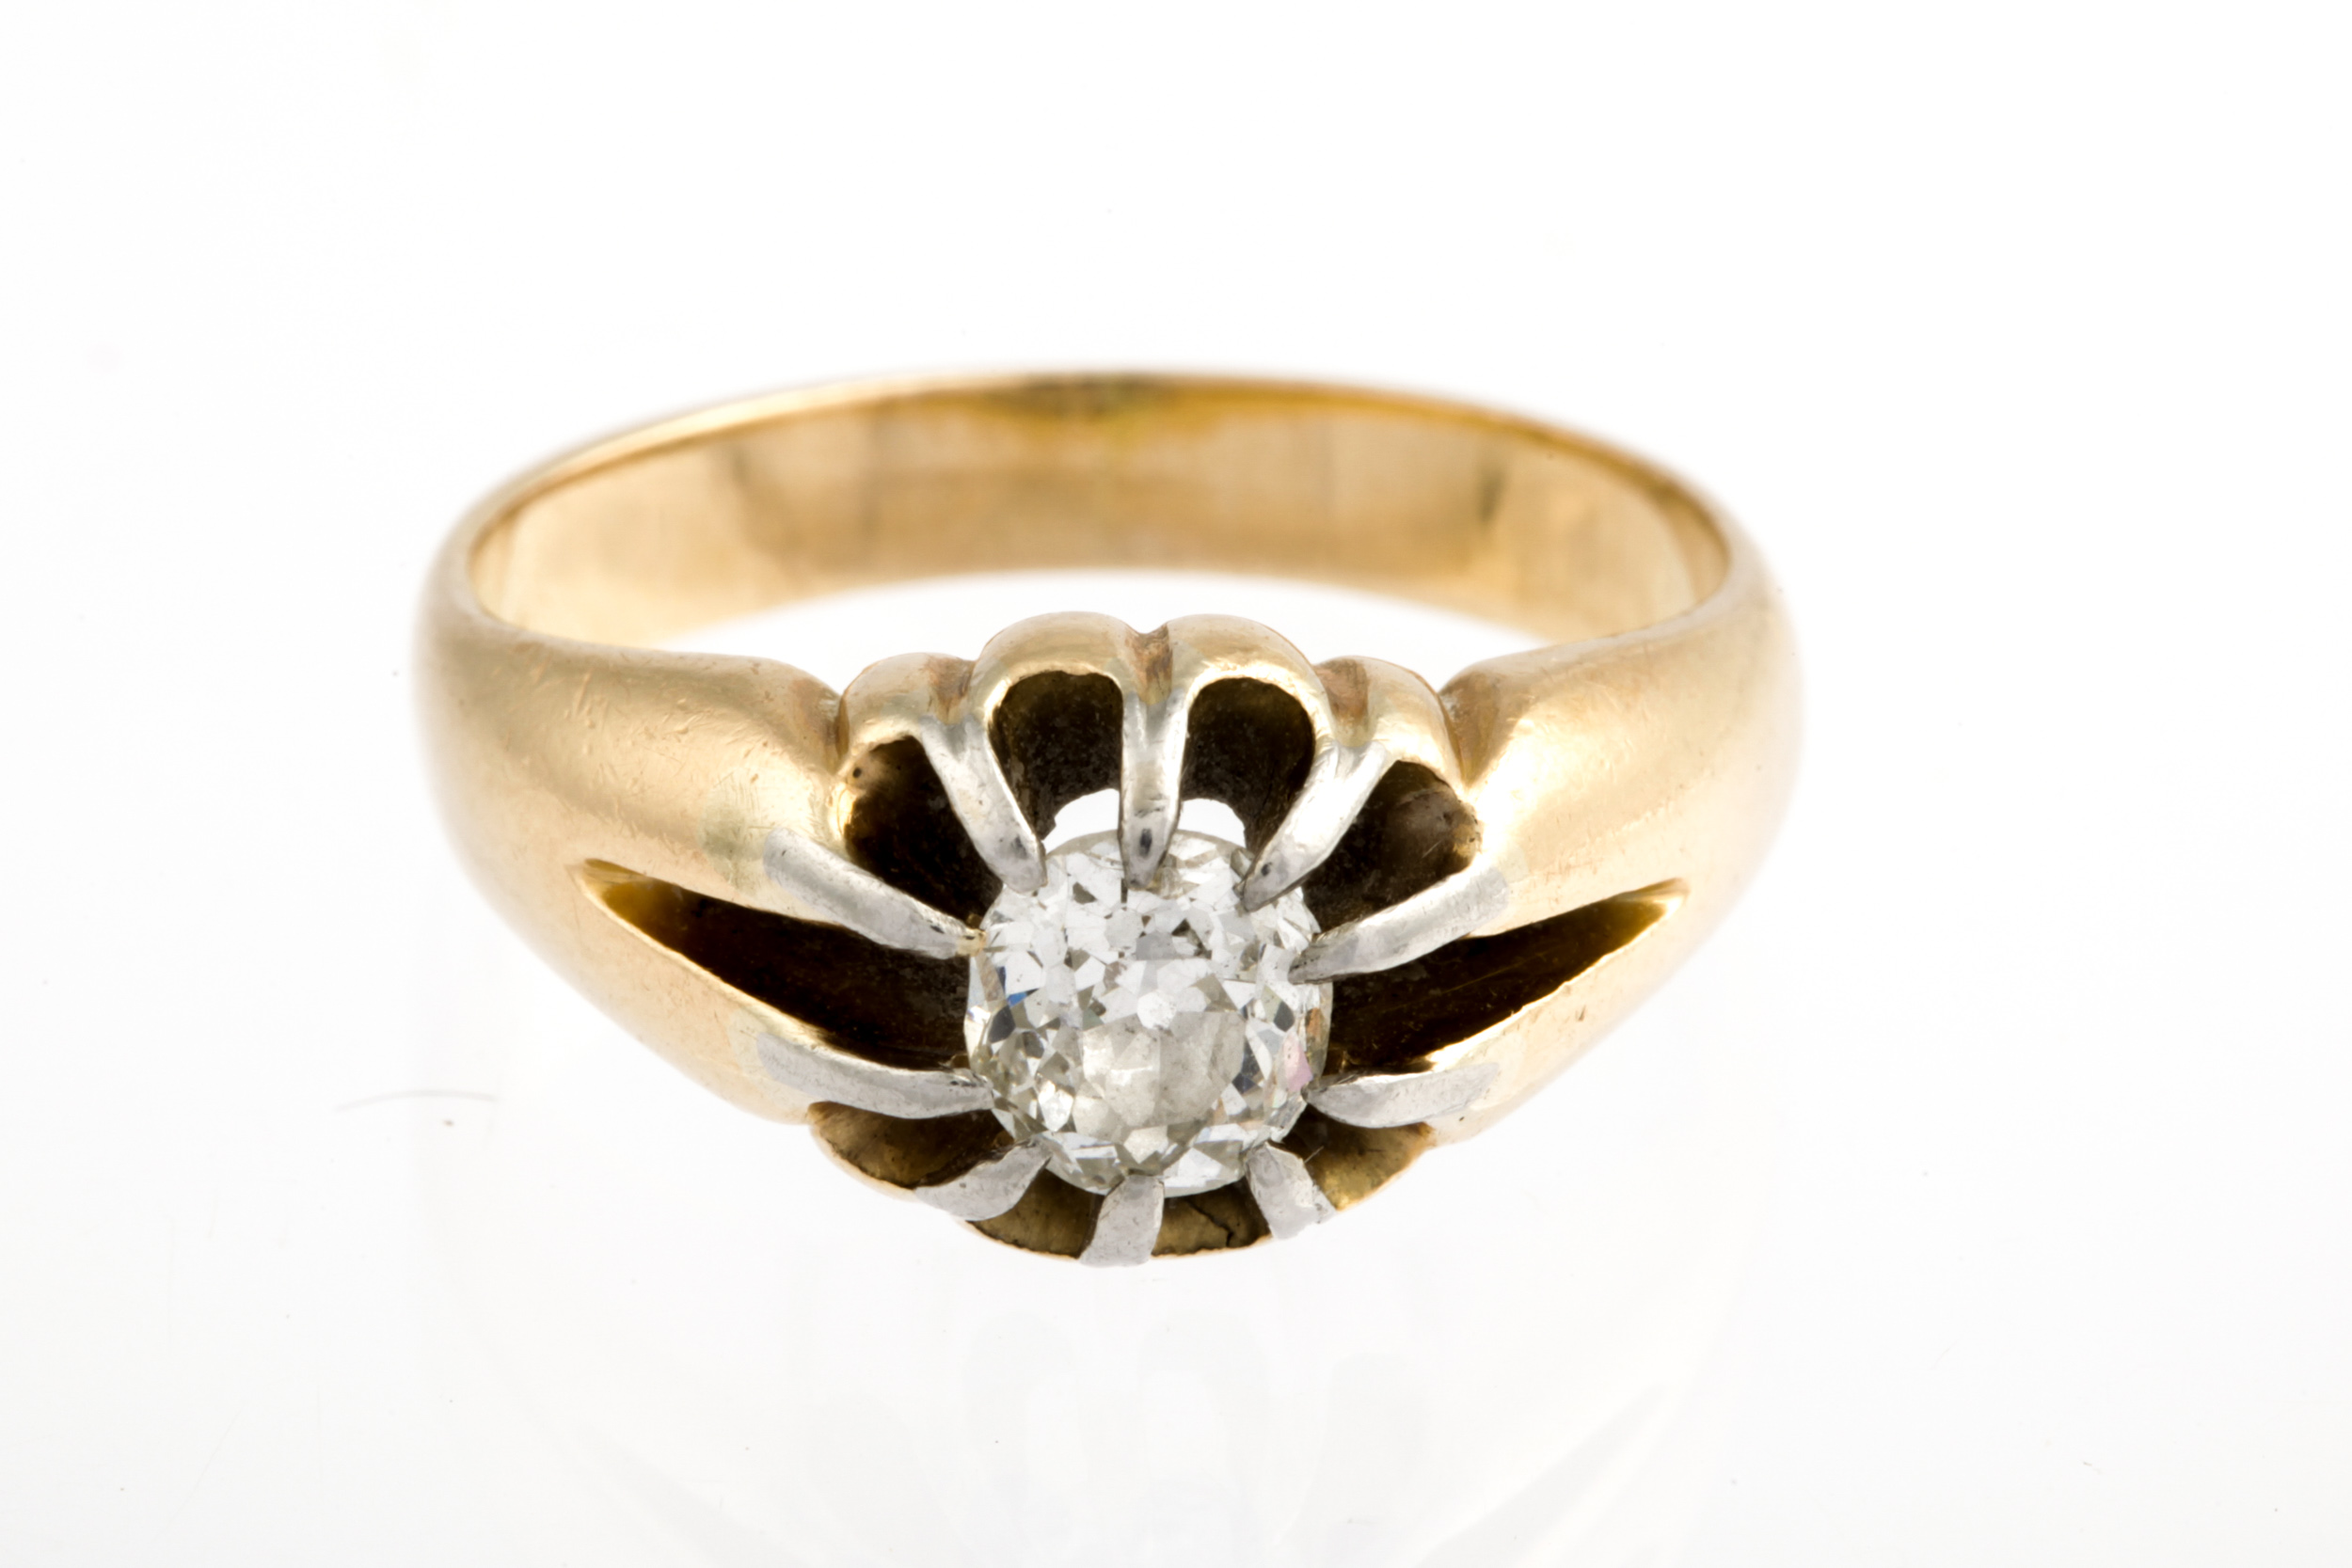 An early 20th century gold and diamond solitaire gypsy ring. - Image 3 of 3